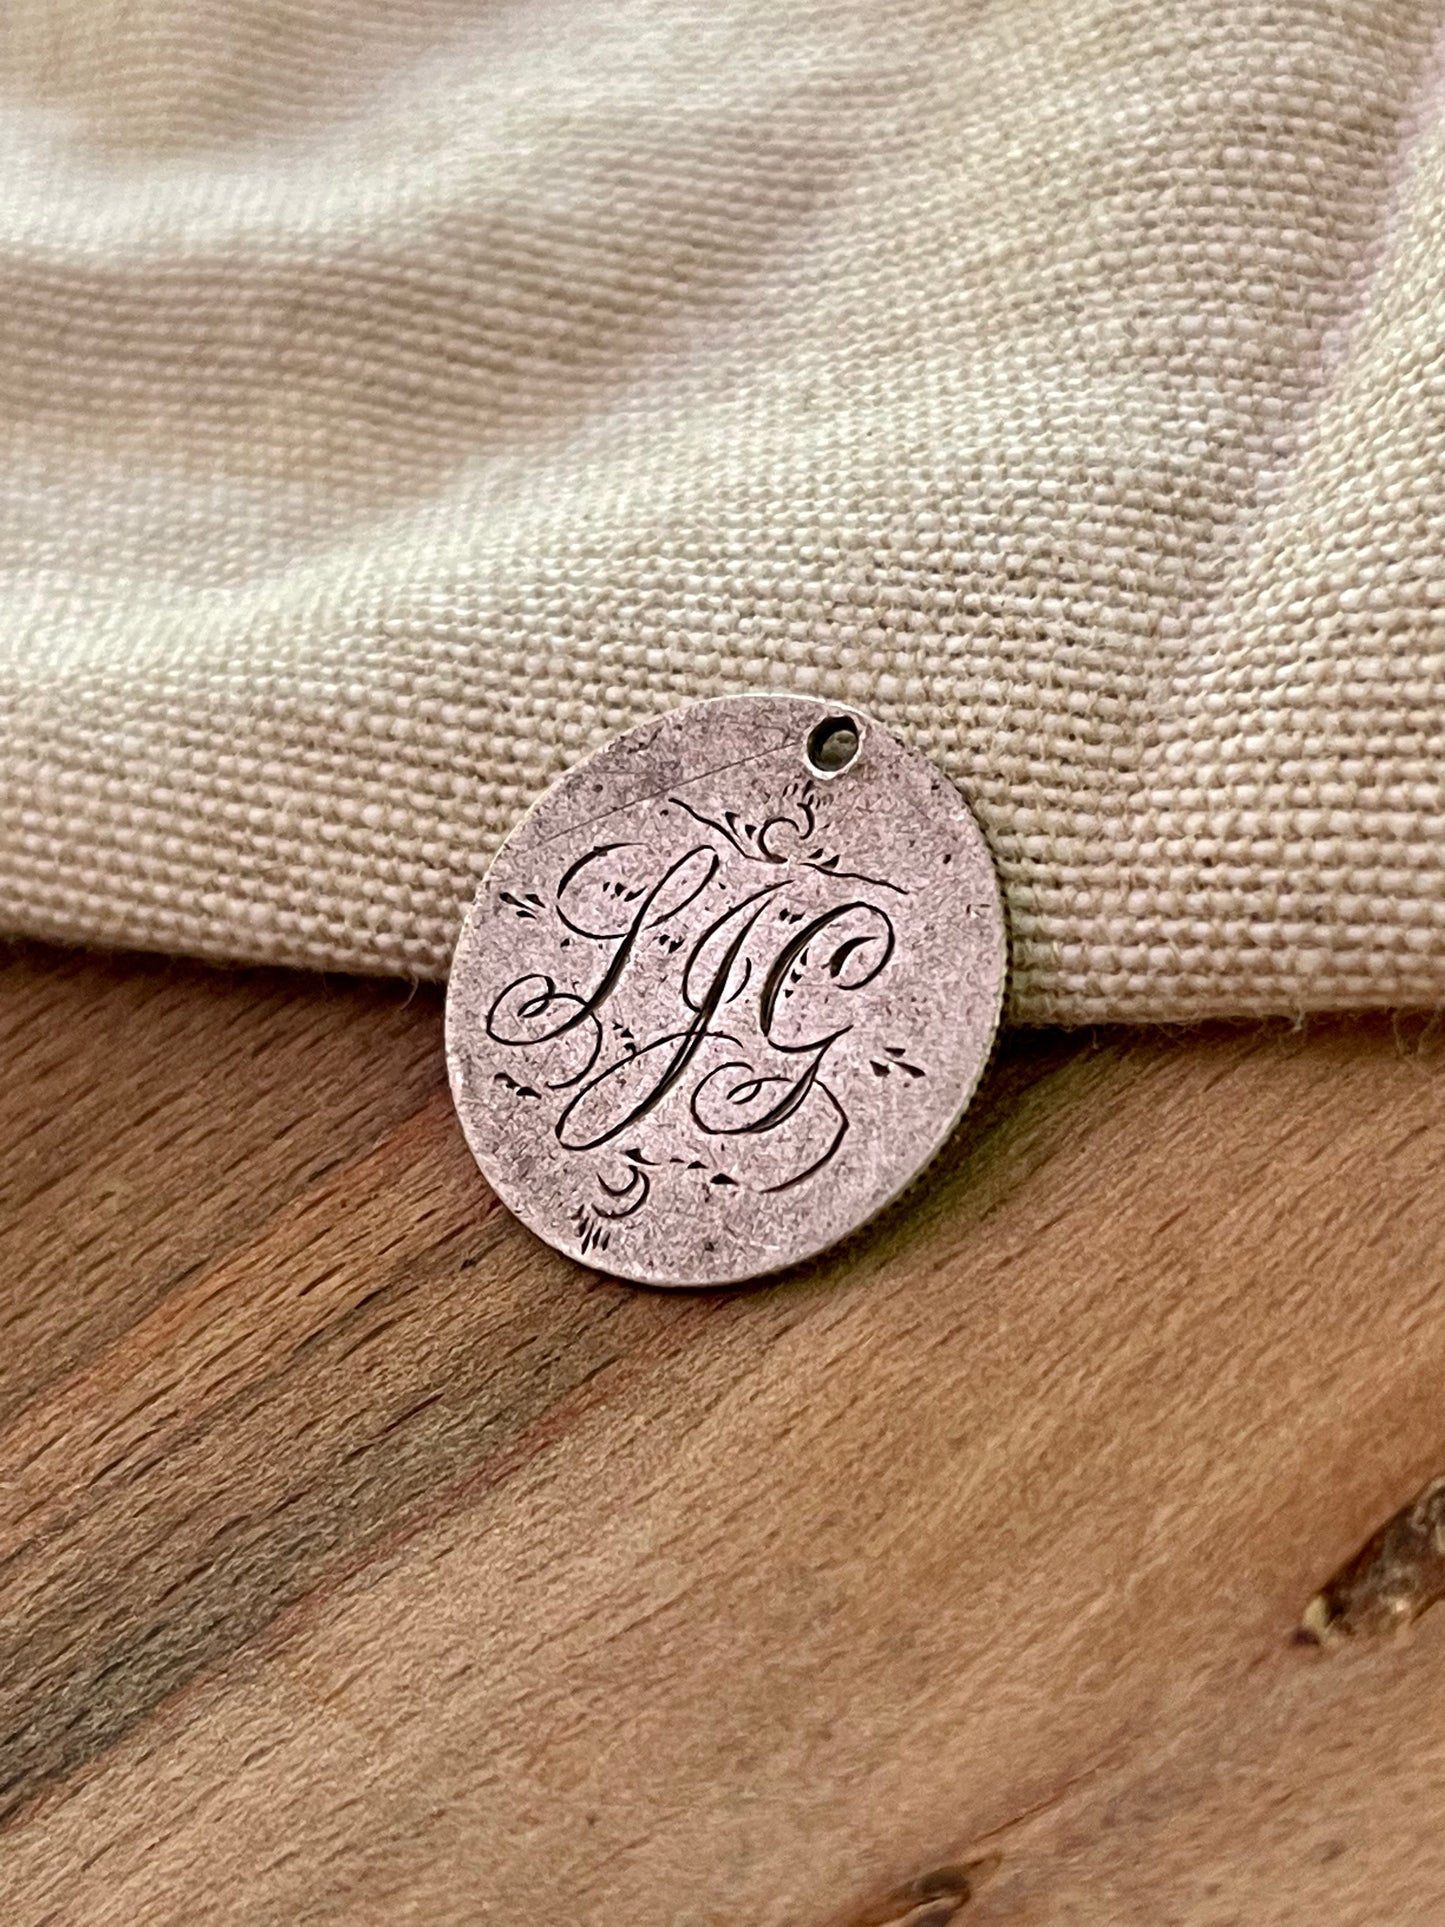 Cute Small Engraved Coin Pendant Sterling Silver 3 Pence Antique Vintage Jewelry